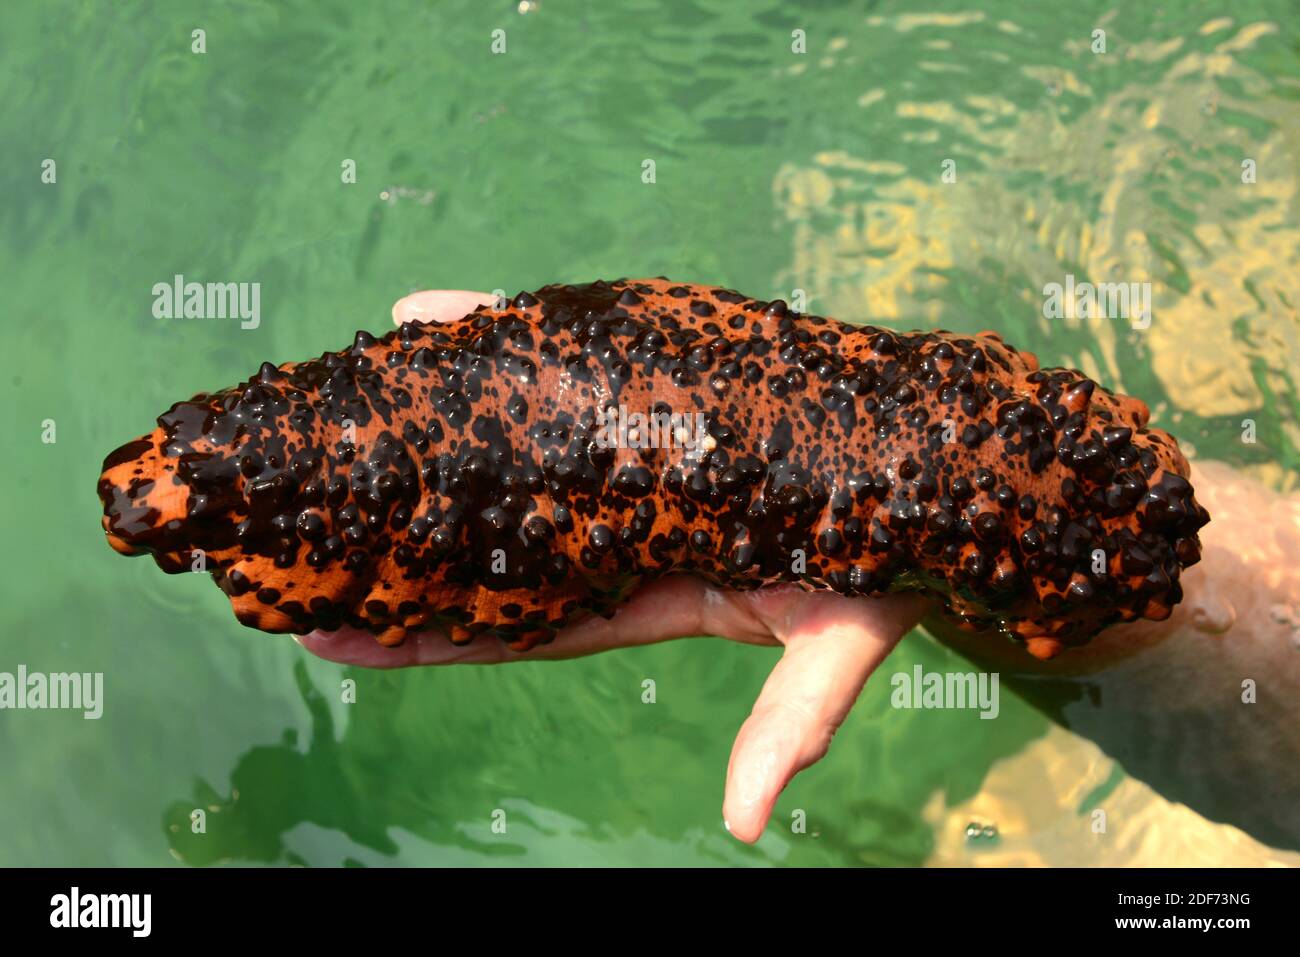 Chocolate chip cucumber (Isostichopus badionotus) is a sea cucumber native to tropical Waters of Atlantic Ocean. This photo was taken in Paraty Stock Photo